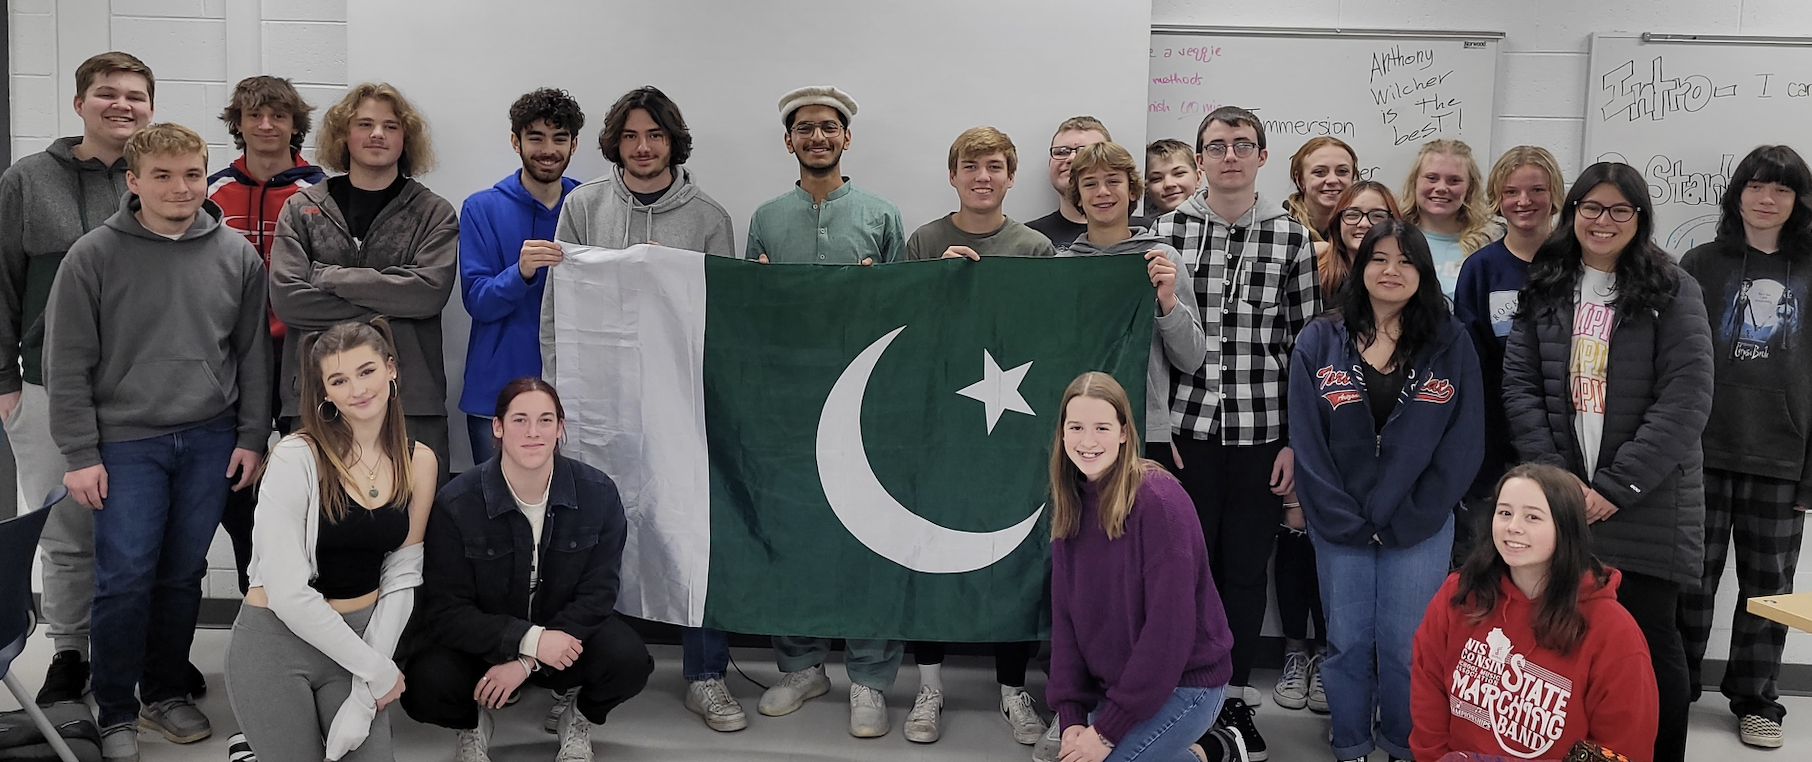 Hashir, YES student, holding a Pakistani flag and standing next to his classmates.